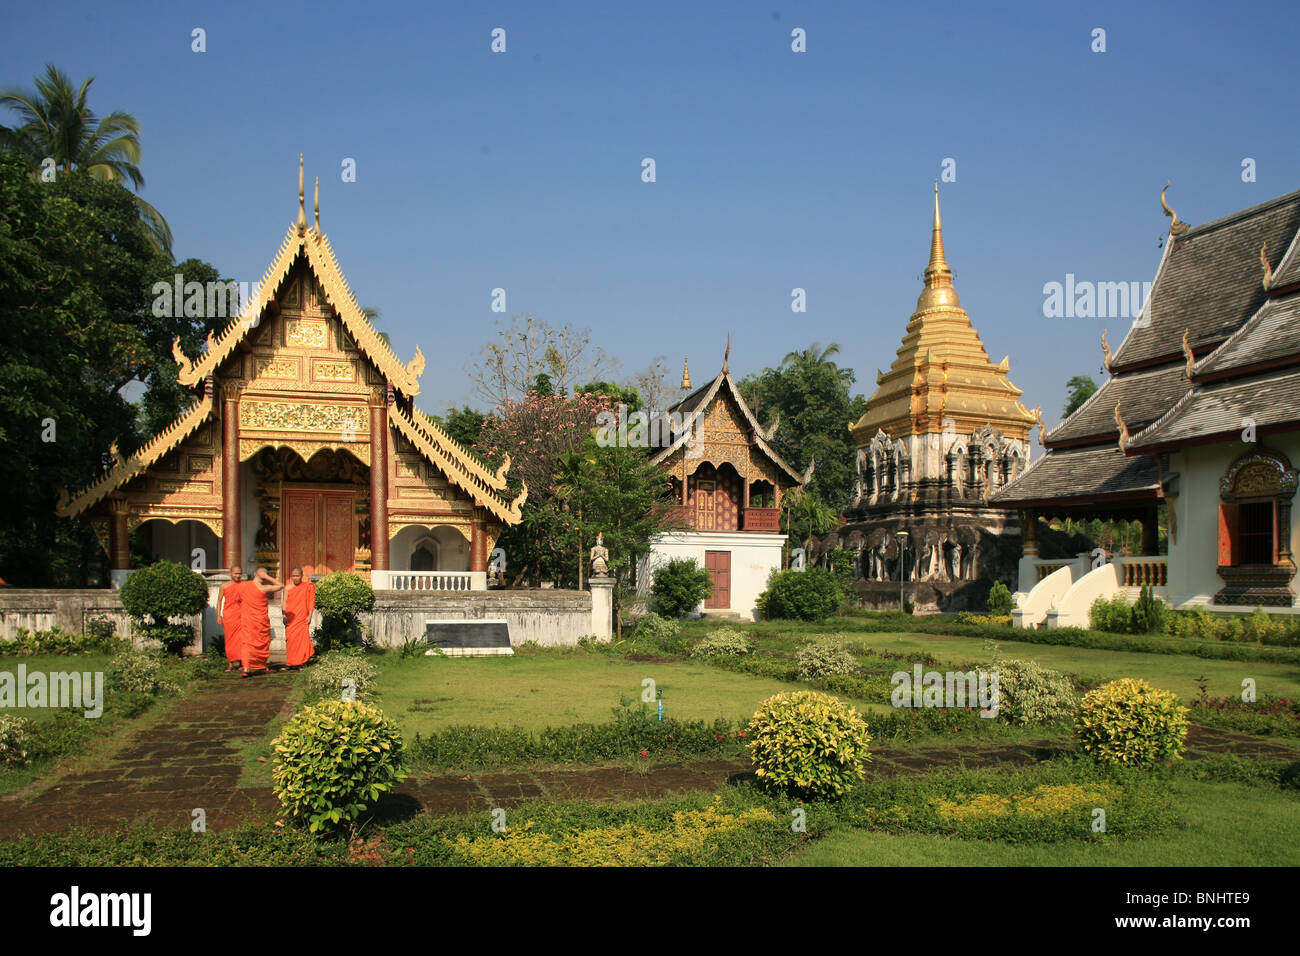 Thailand Asia culture the north Chiang May Wat Chiang Mun temple religion buddhism buddhist cult site monks Stock Photo